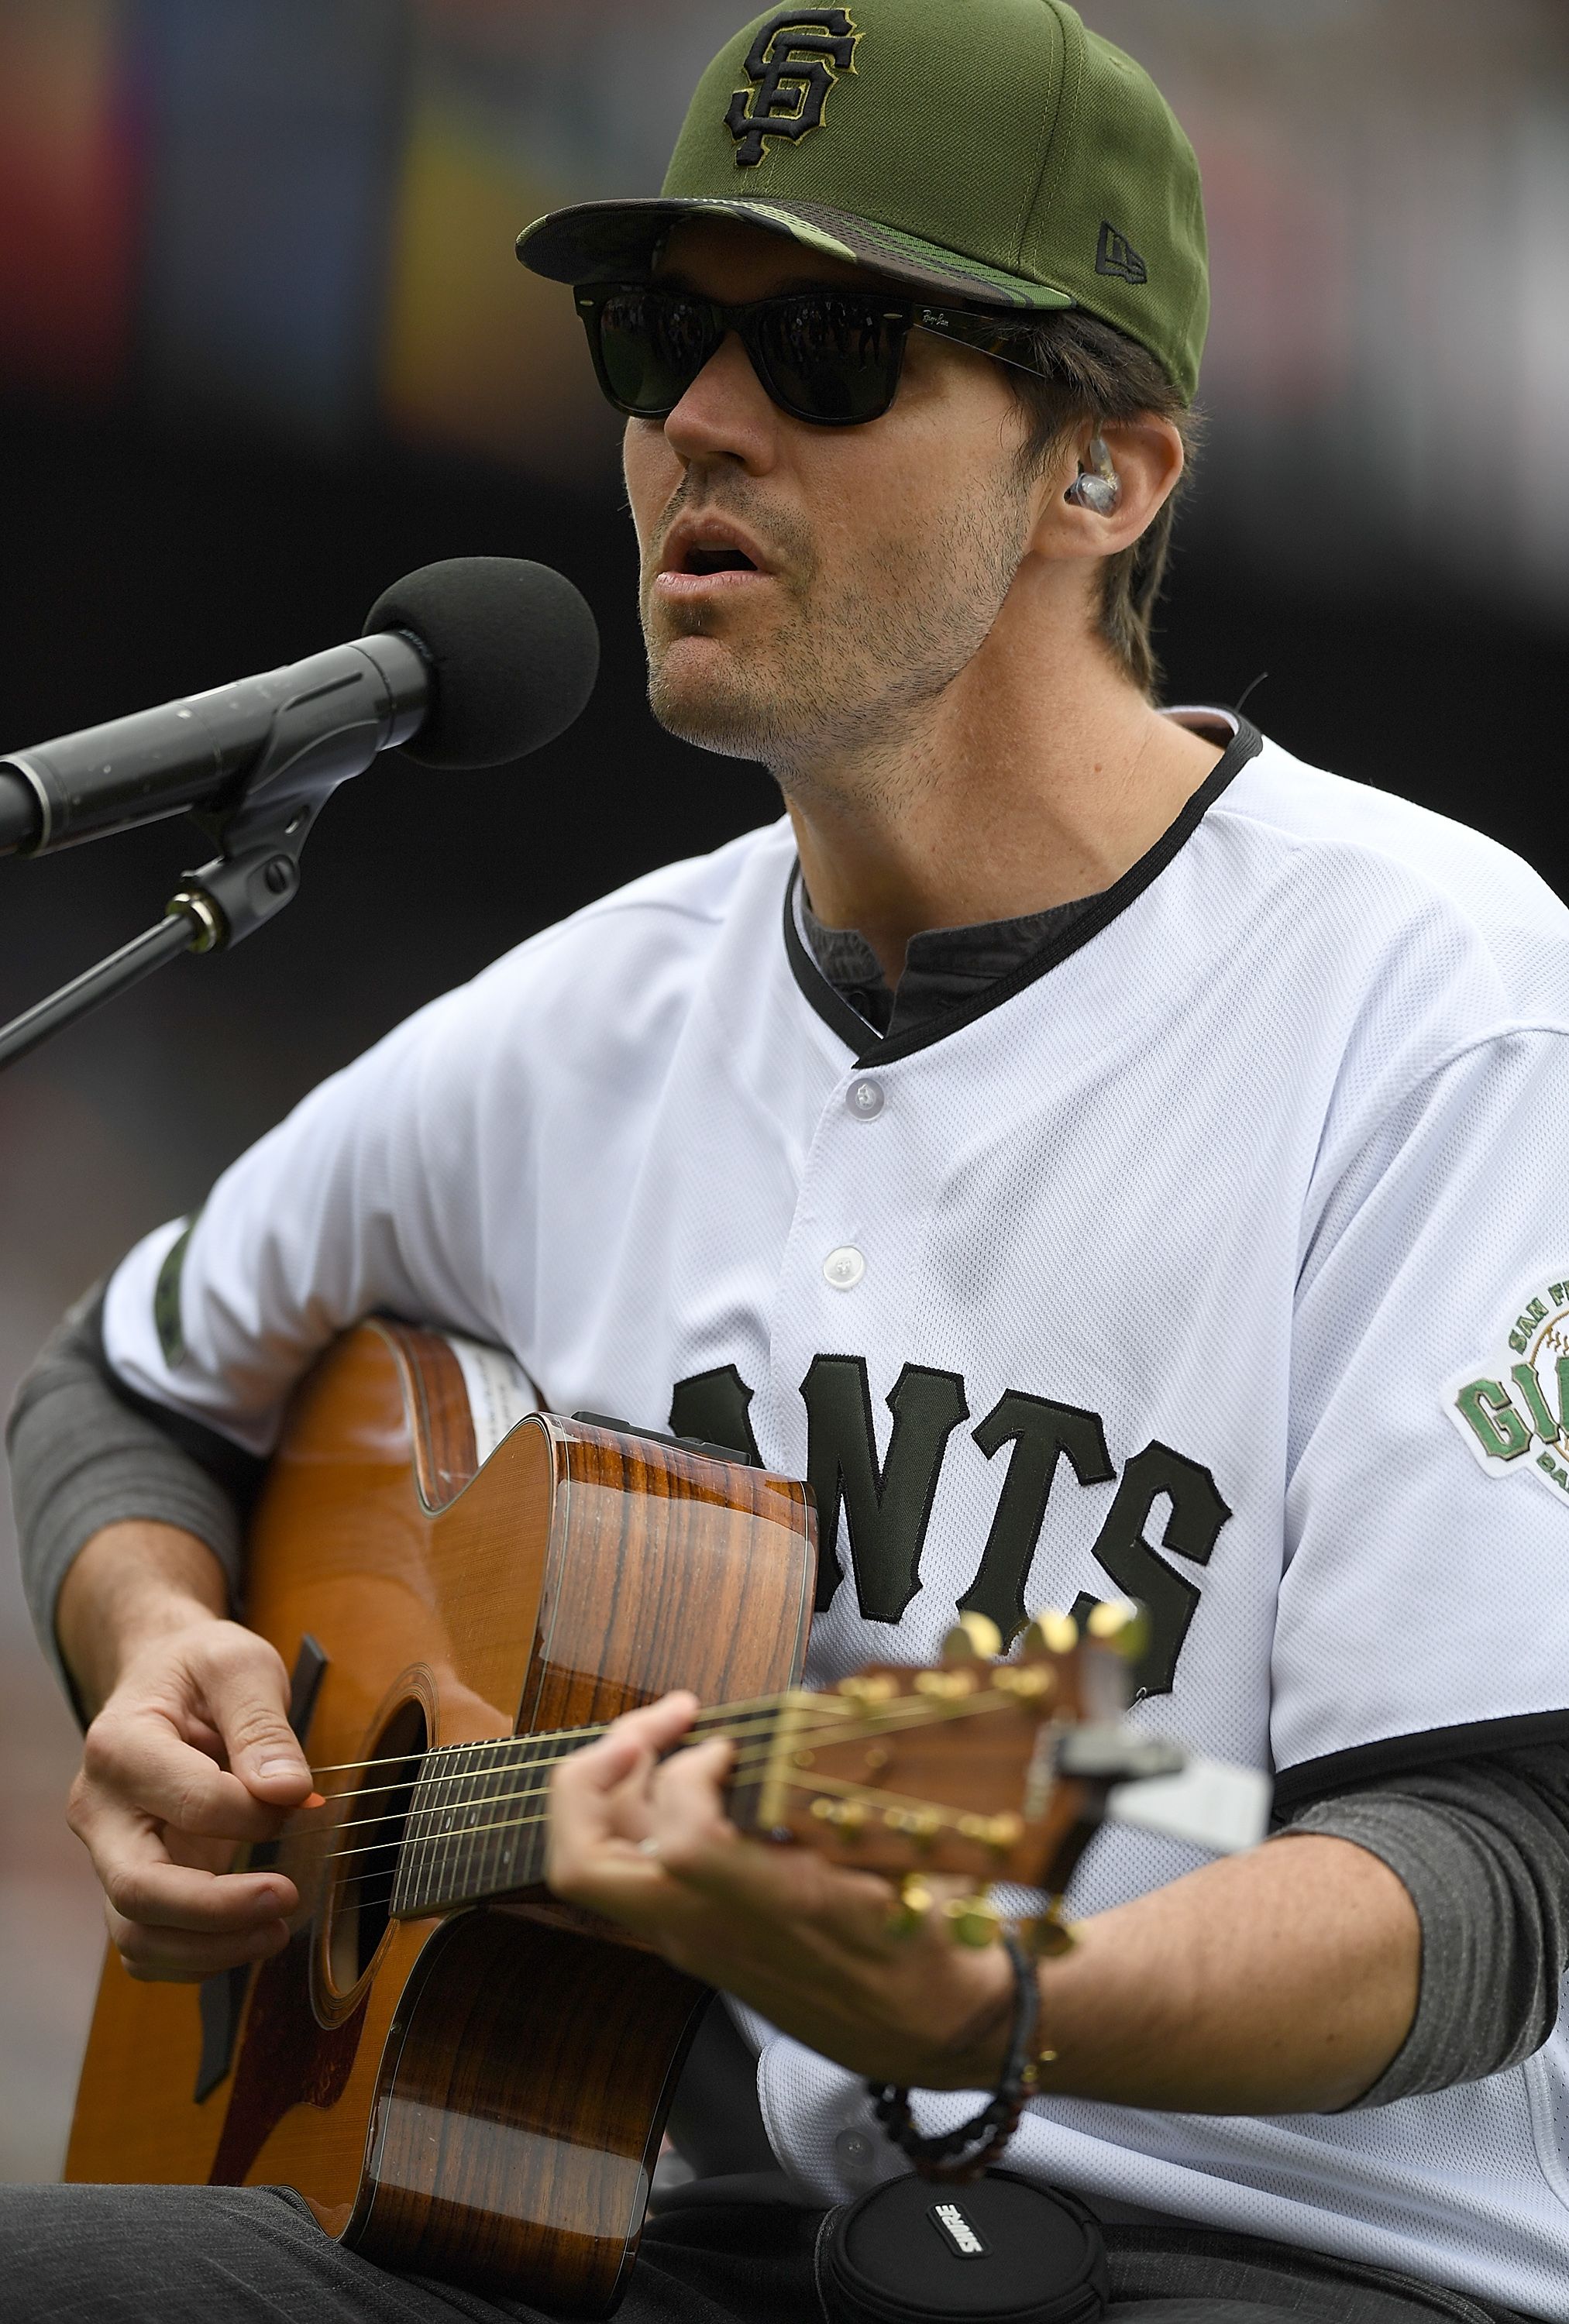 Barry Zito's Wife: Giants' Star Pitcher and Amber Seyer Share